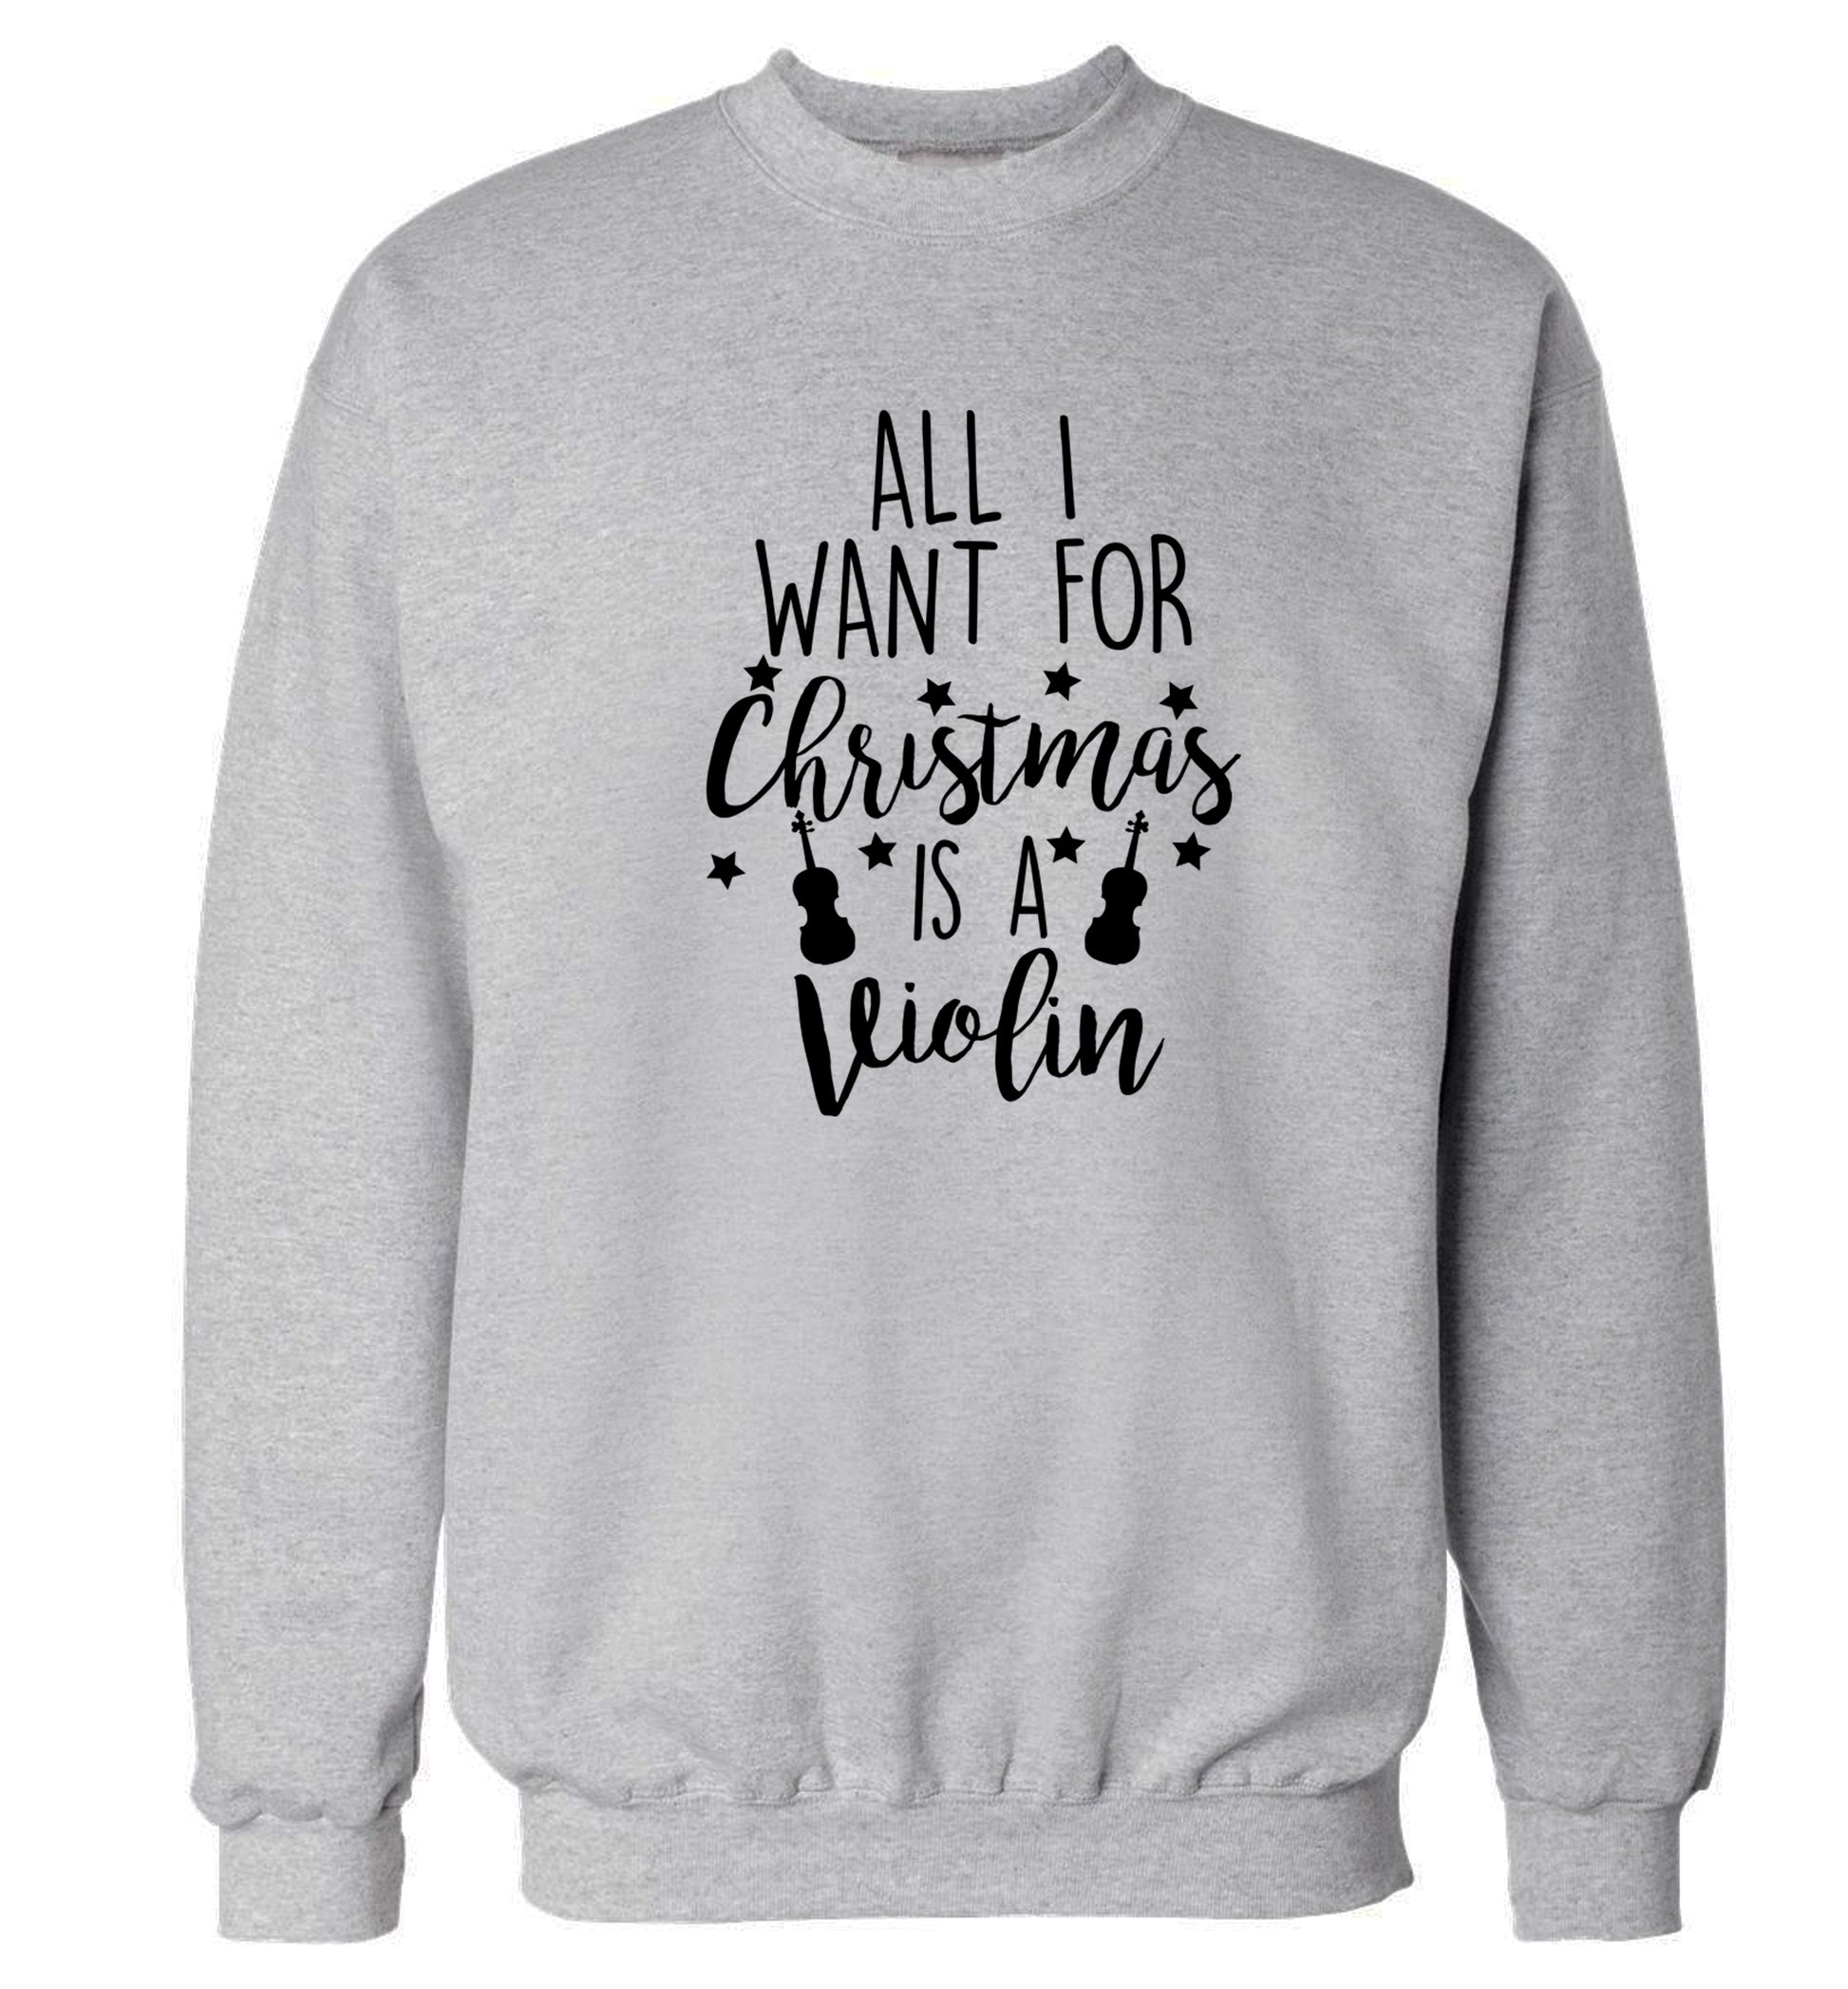 All I Want For Christmas is a Violin Adult's unisex grey Sweater 2XL